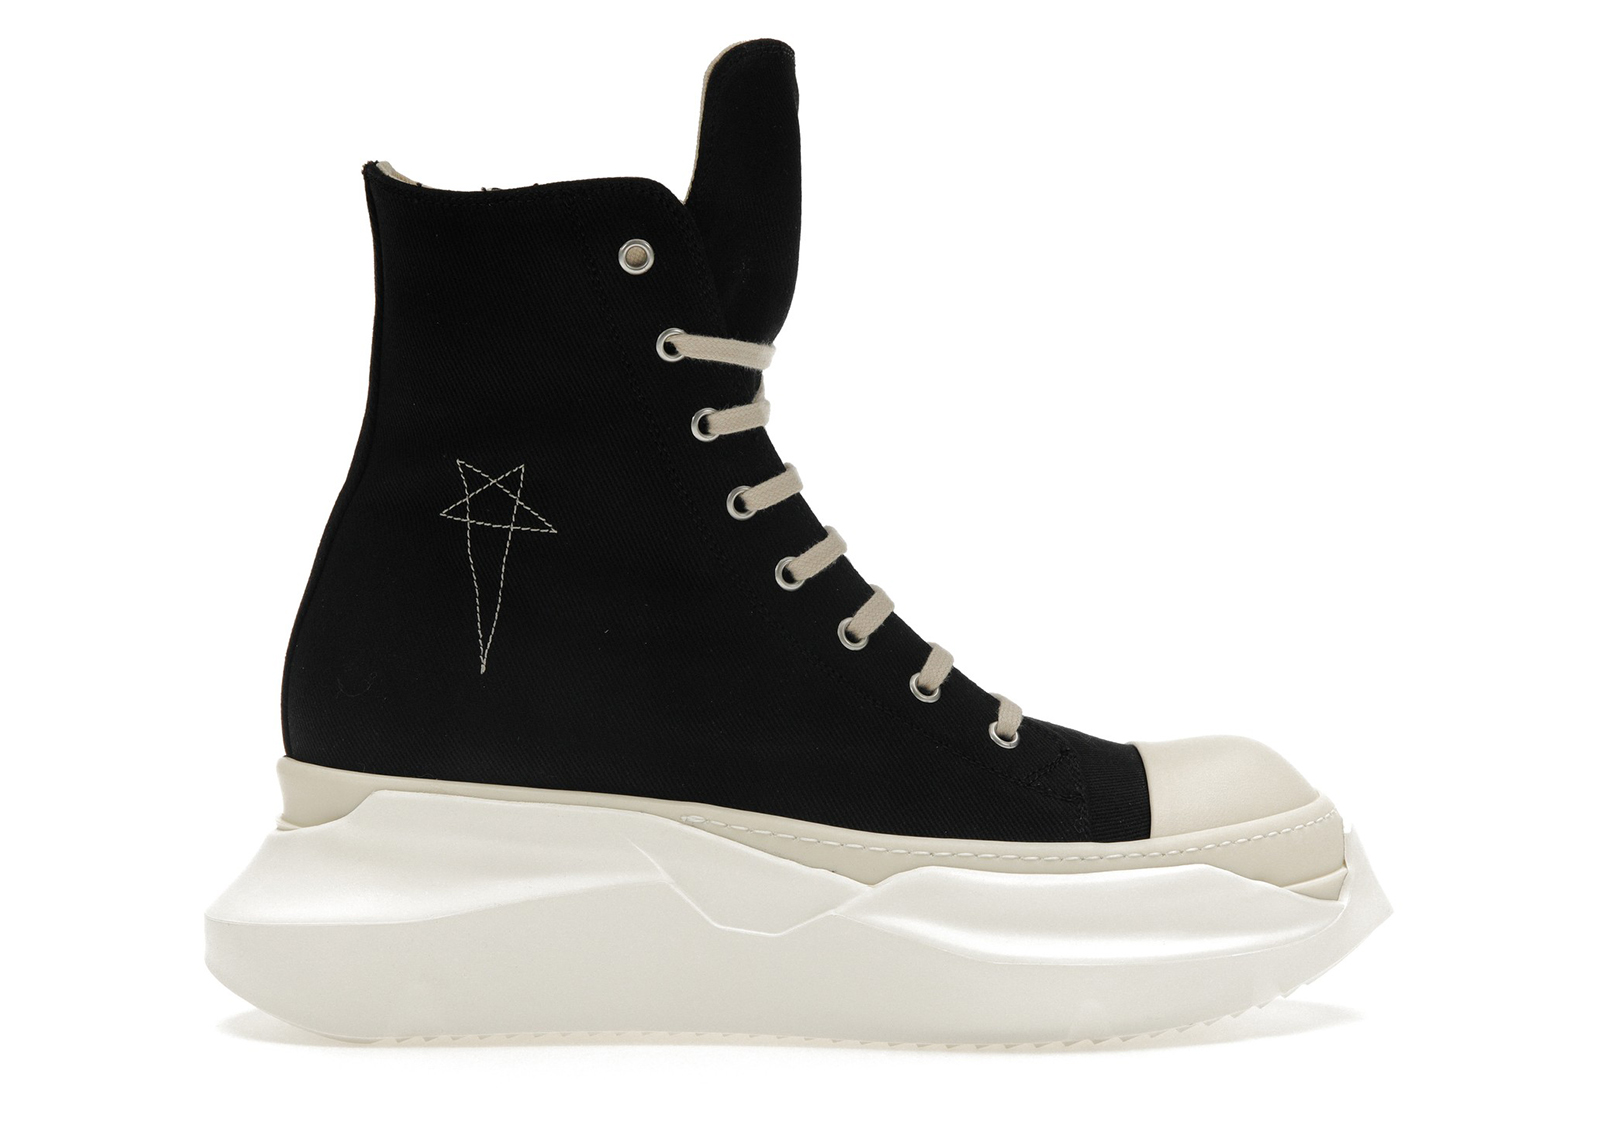 Rick Owens DRKSHDW Abstract High Top Embroidered Pentagram Black